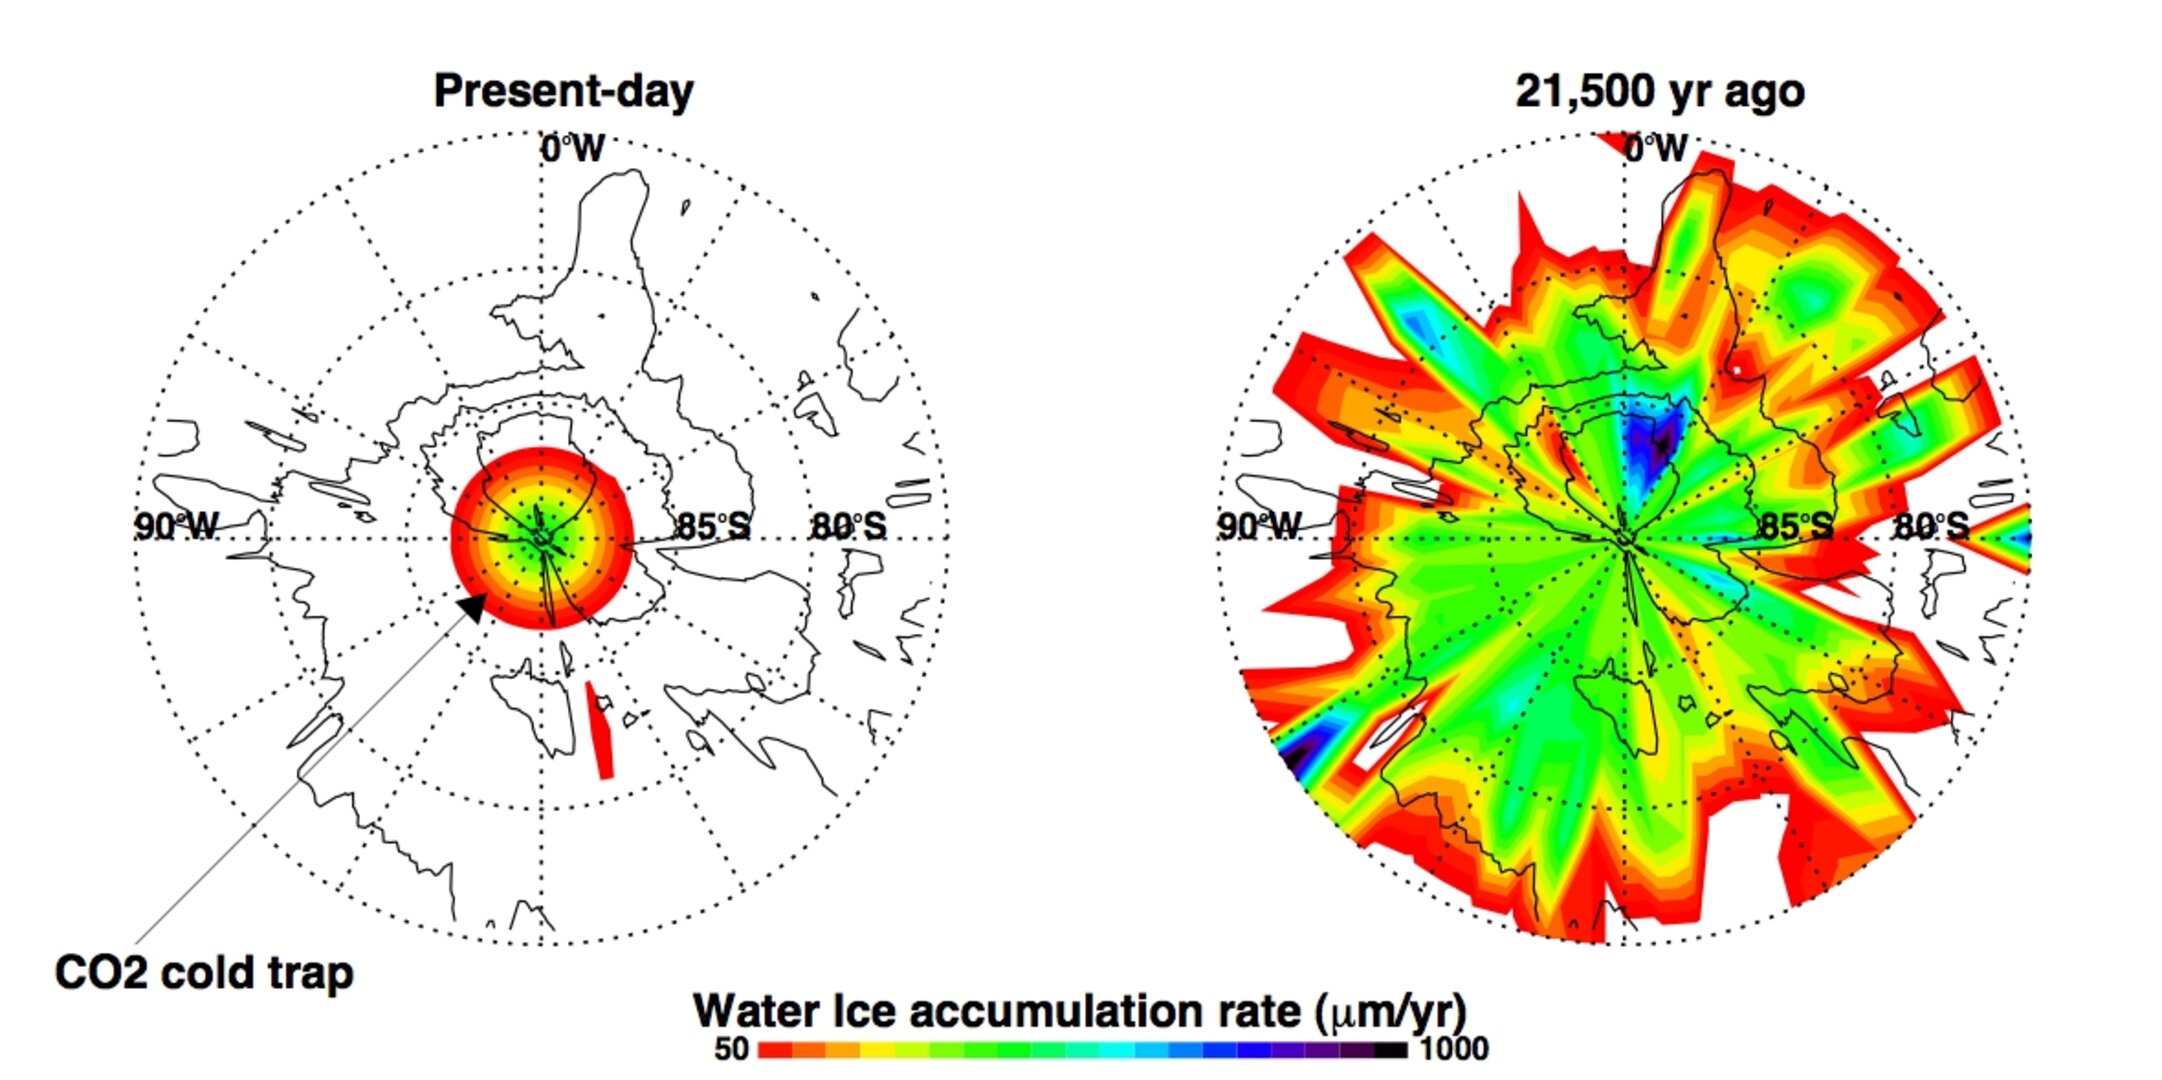 Water-ice accumulation rate at Martian South Pole